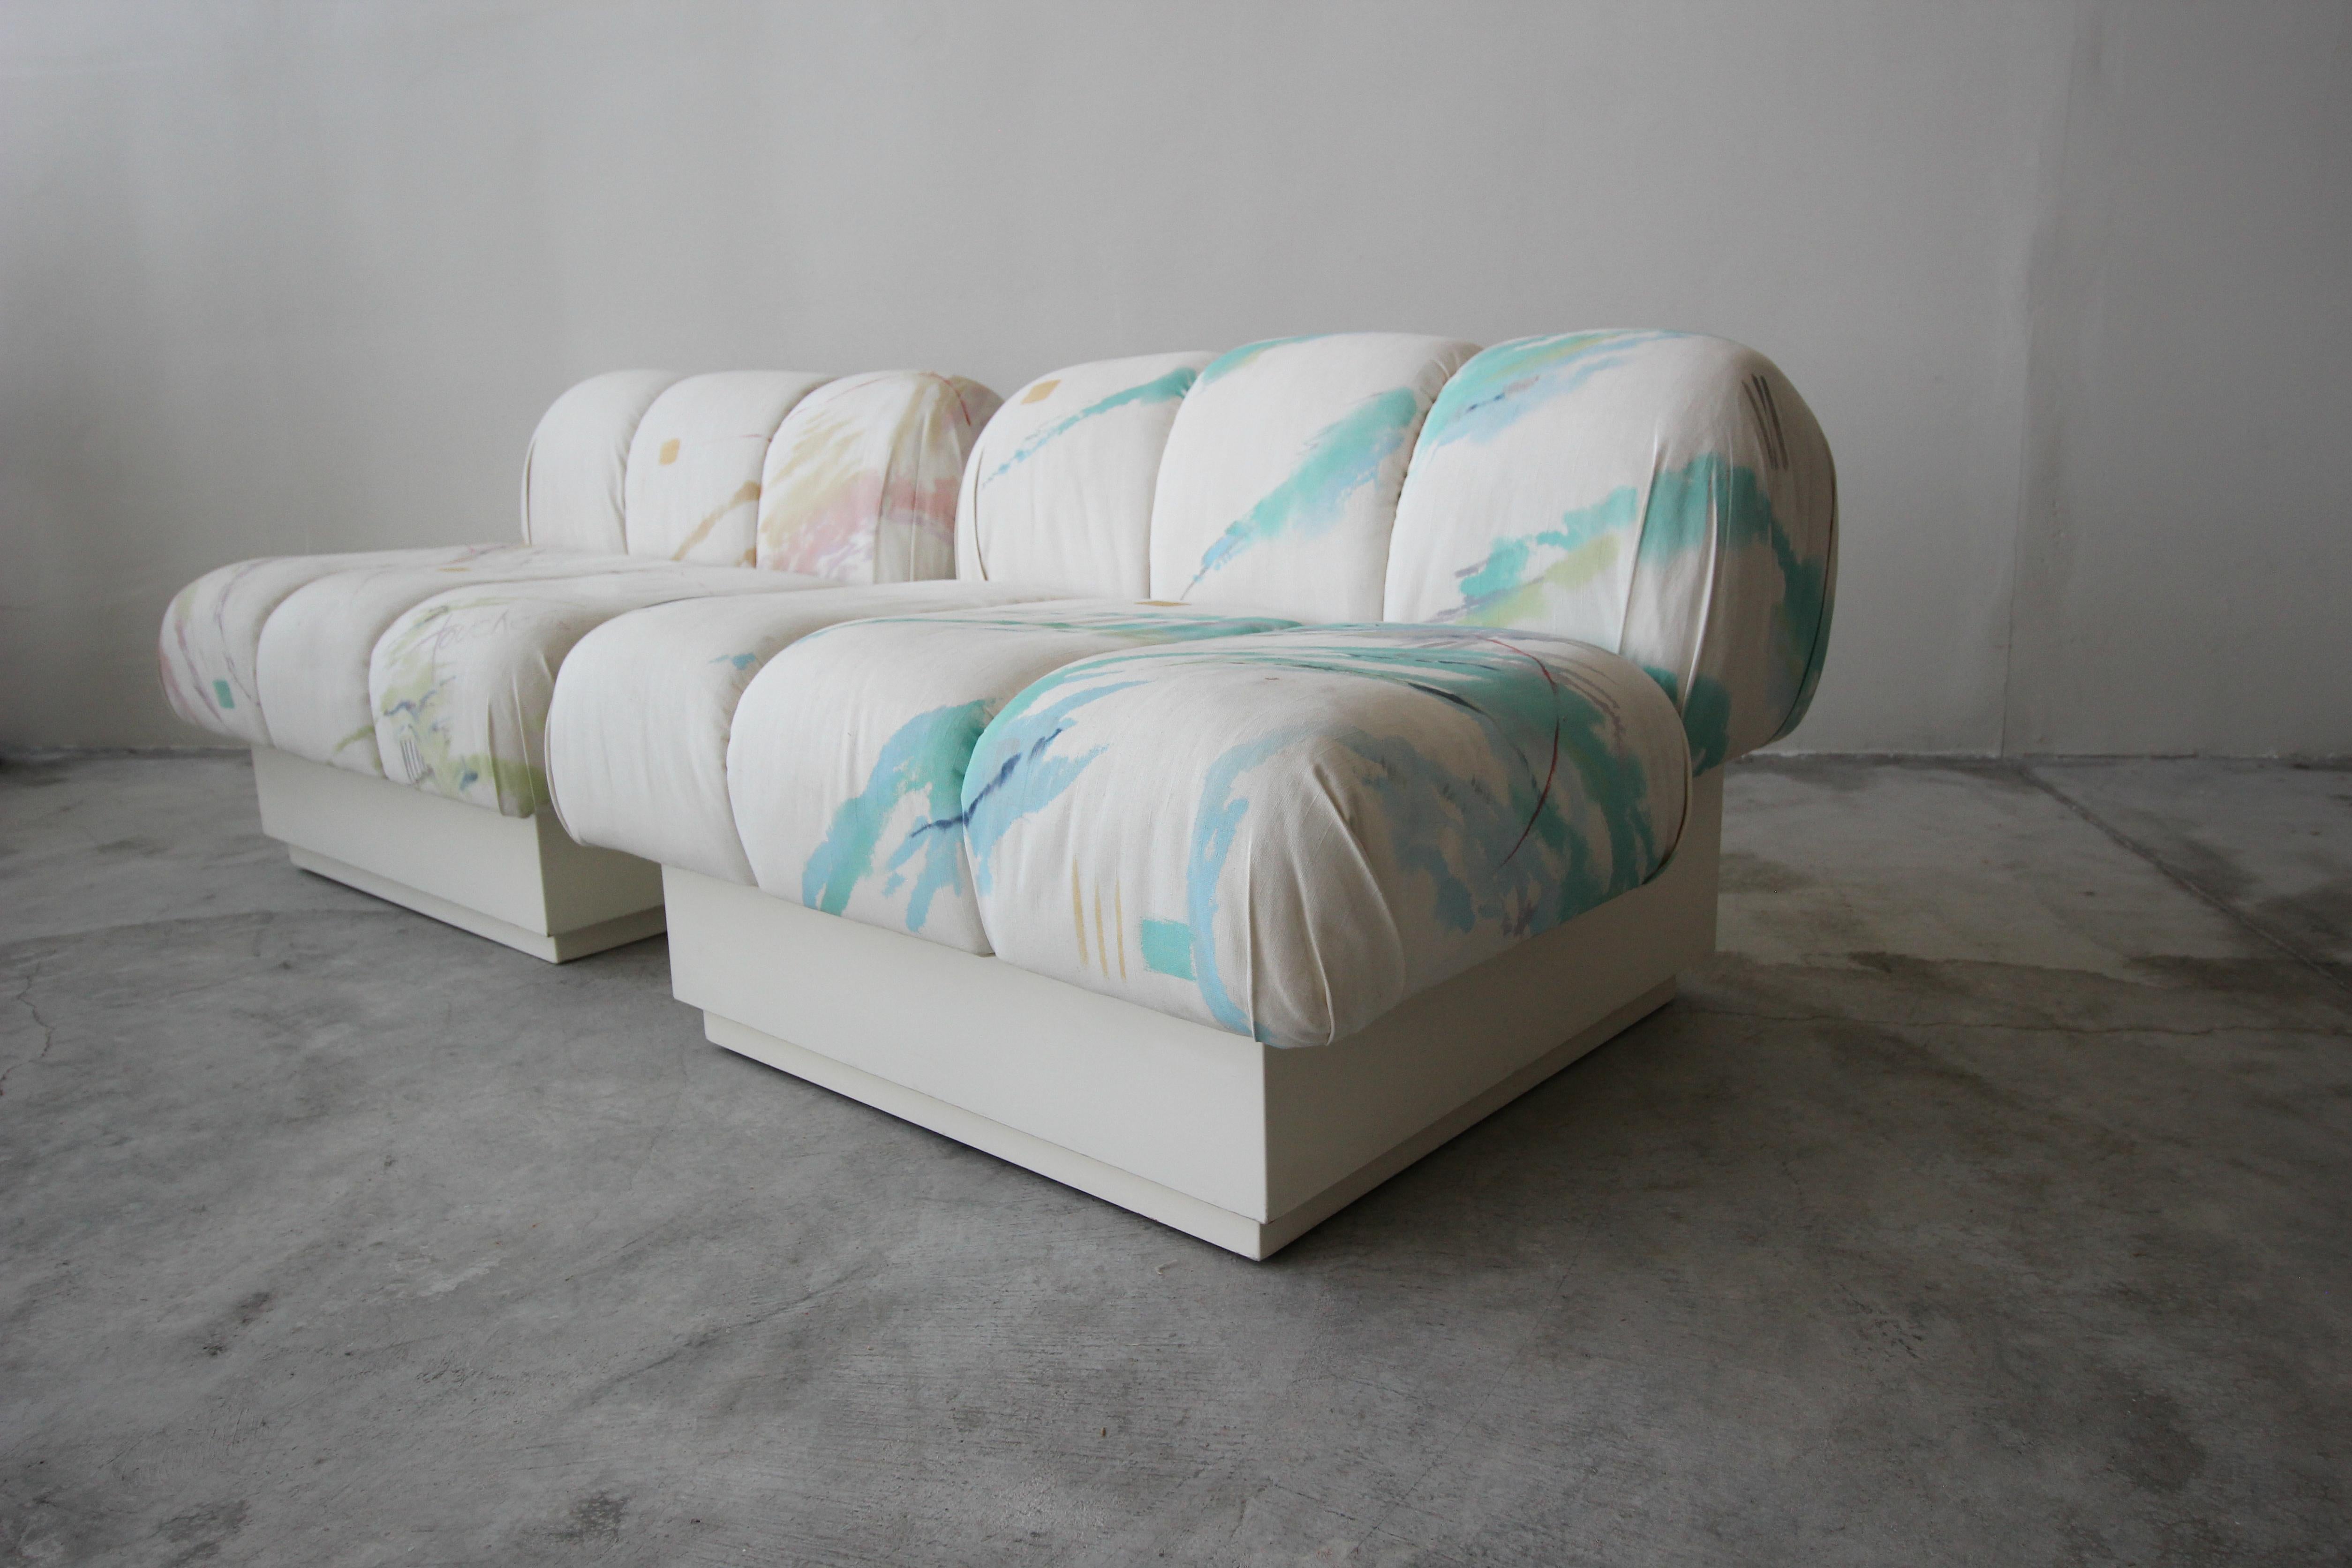 Incredible and large, Postmodern Italian style slipper chairs on a plinth bases. Most likely a custom piece, these beauties truly have lines and curves worth coveting.

Kept as found, in their Pop Art style, Touché, Artist-signed fabric. Chairs